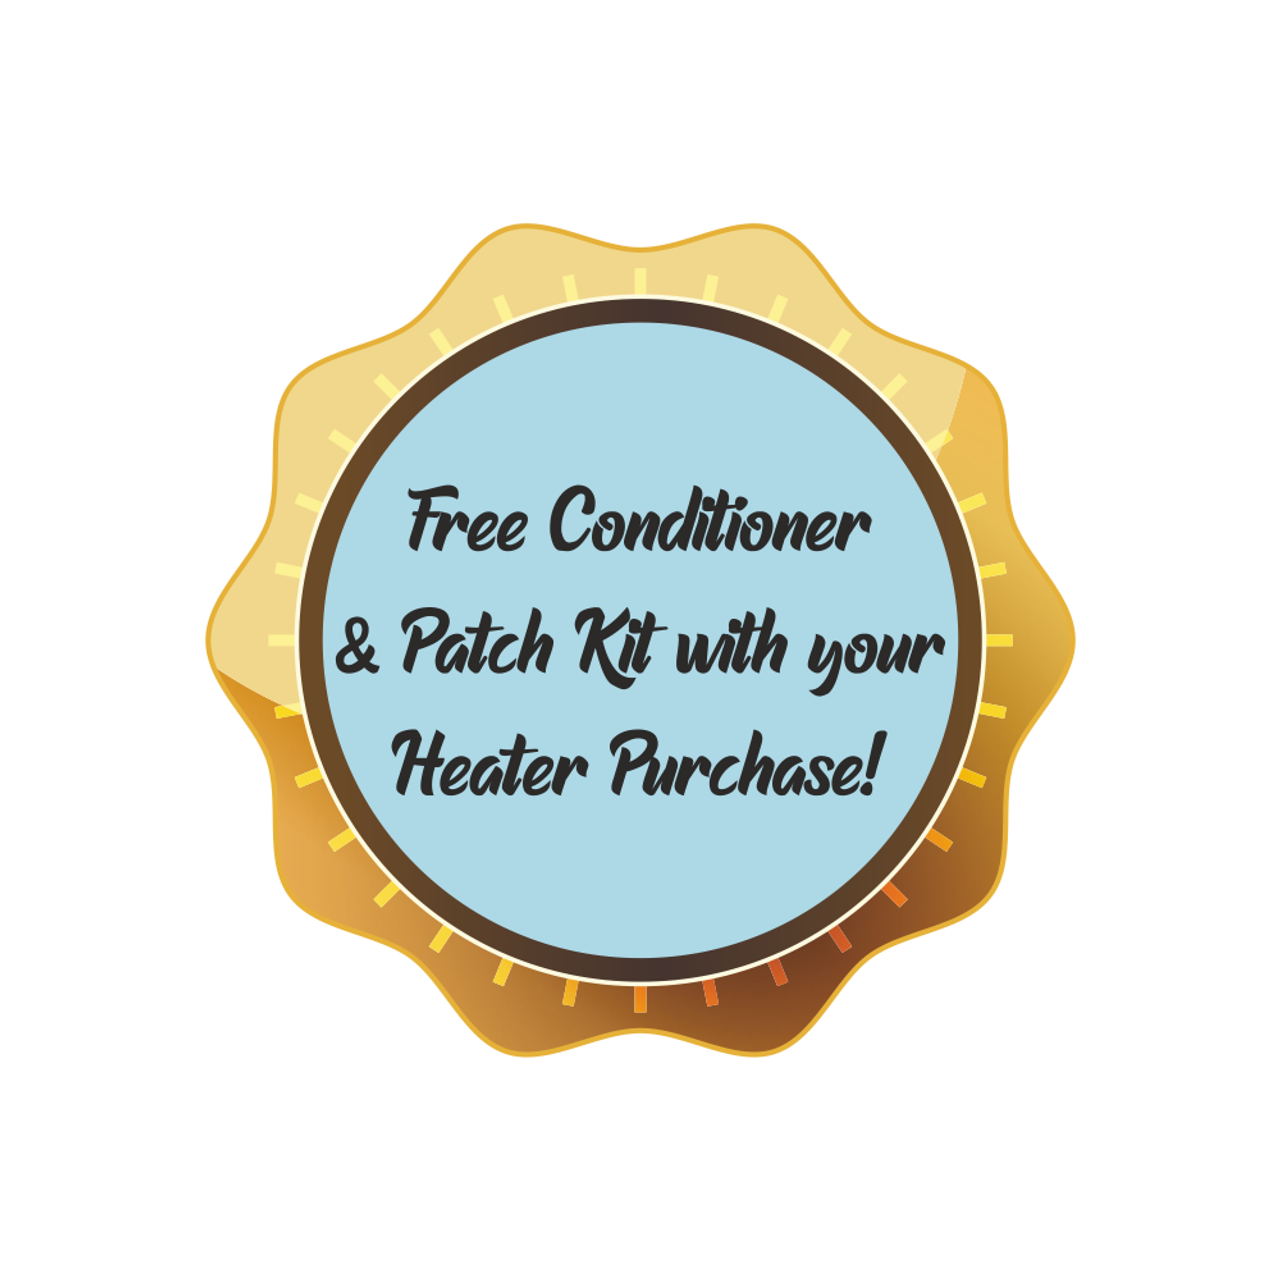 FREE CONDITIONER AND PATCH KIT WITH YOUR HEATER PURCHASE!